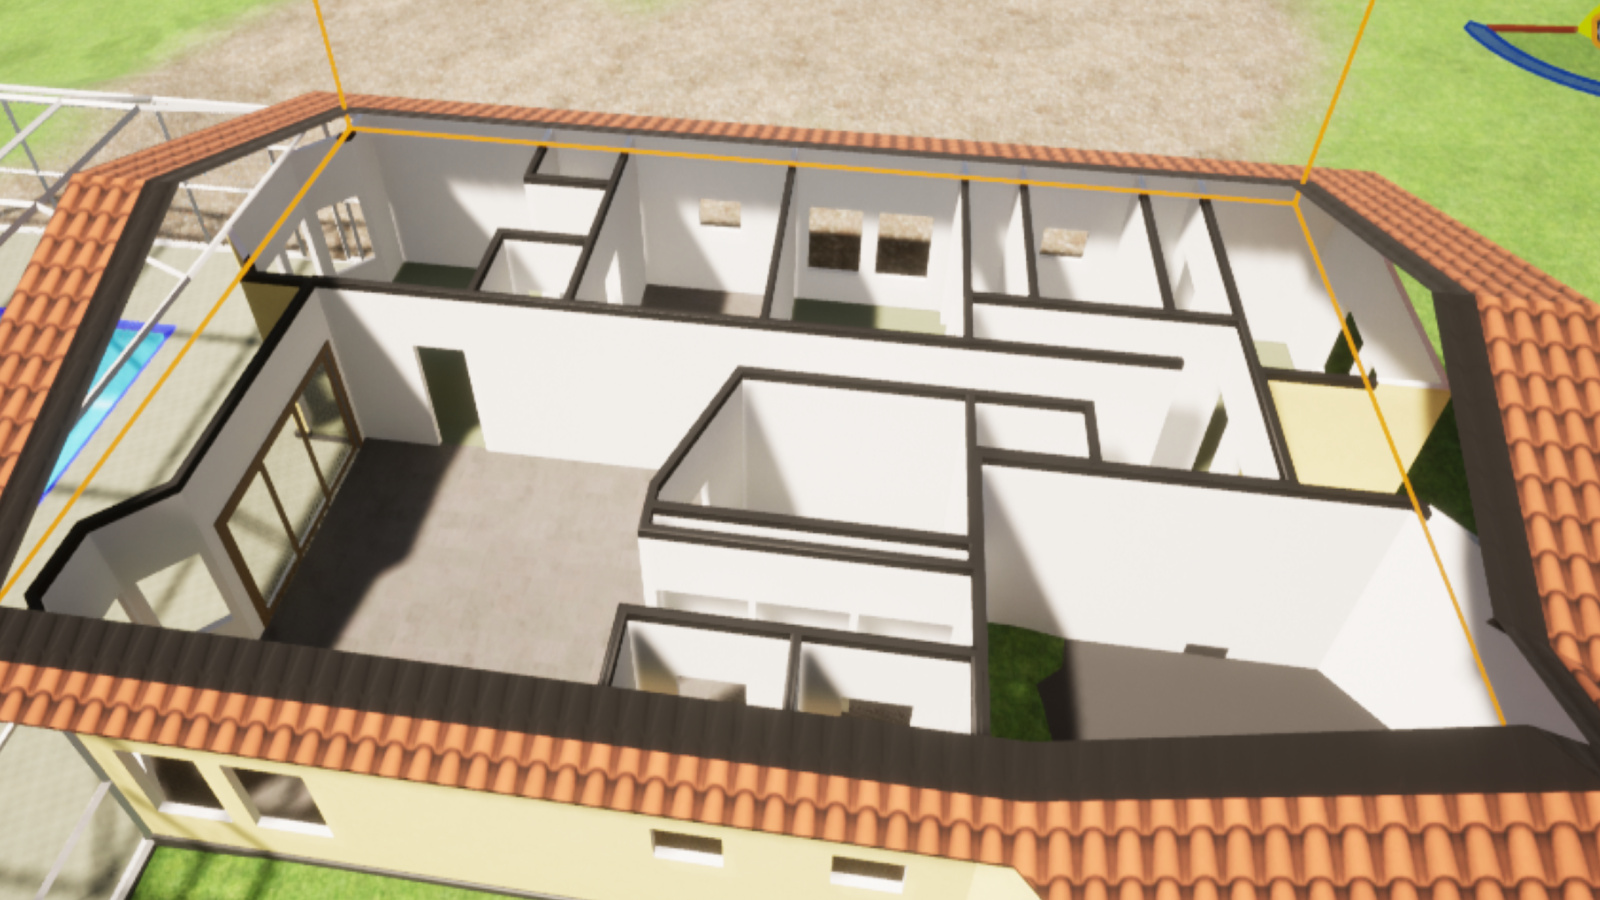 Perspective view from outside and a few meters above a medium-sized single family residence. The roof and ceiling are removed to show internal layout, and this is a simplified concept render rather than photorealistic.